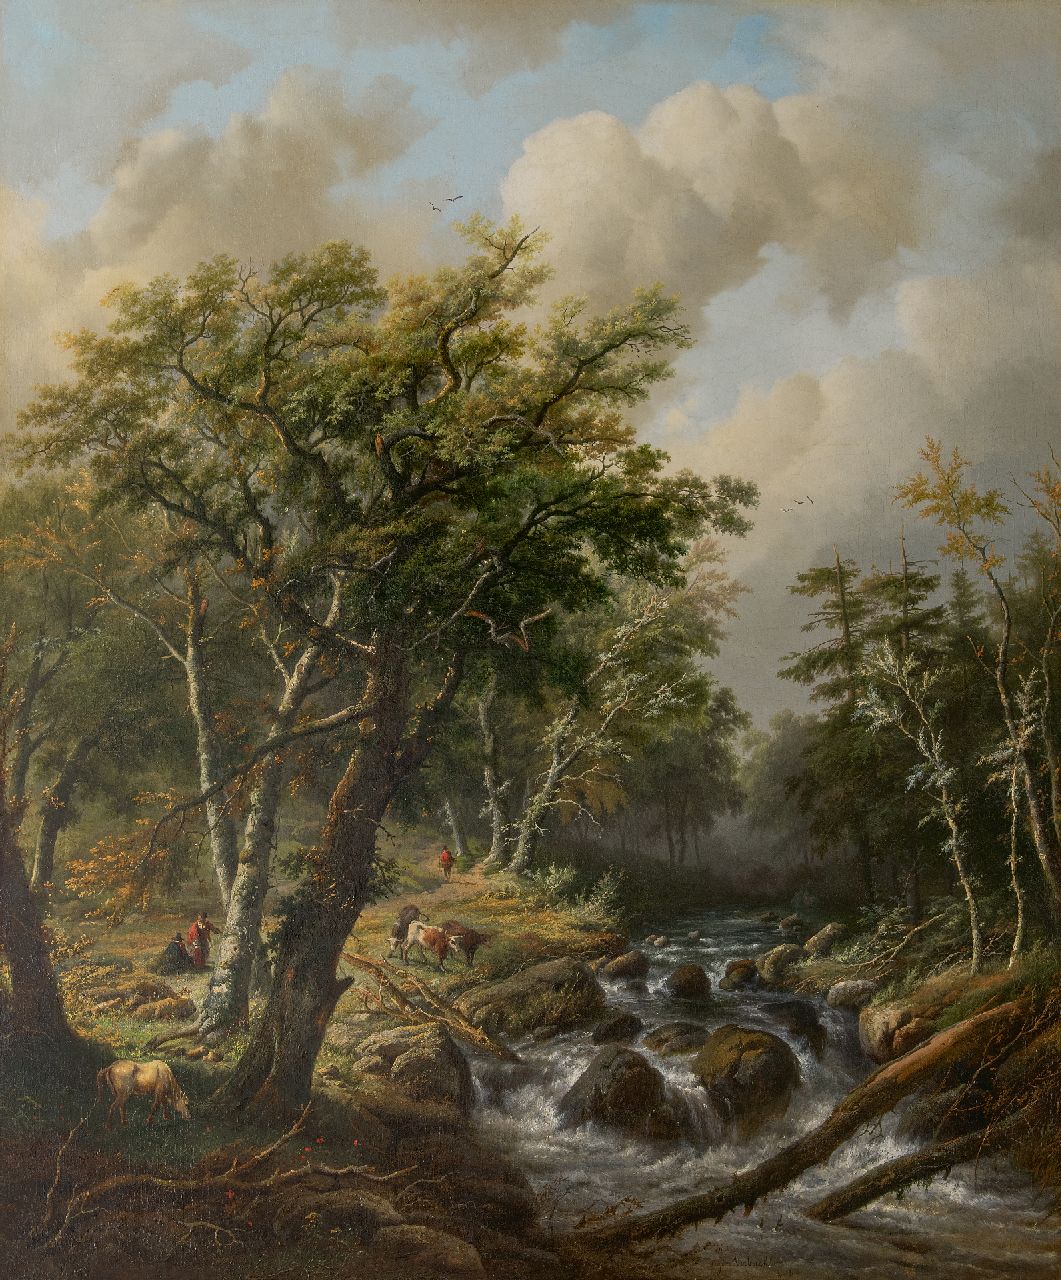 Bodeman/Verboeckhoven W./E.J.  | Willem/Eugène Joseph Bodeman/Verboeckhoven | Paintings offered for sale | A wooded landscape with cows near a wild stream, oil on canvas 129.5 x 110.0 cm, signed l.r. by both artists and dated 1843